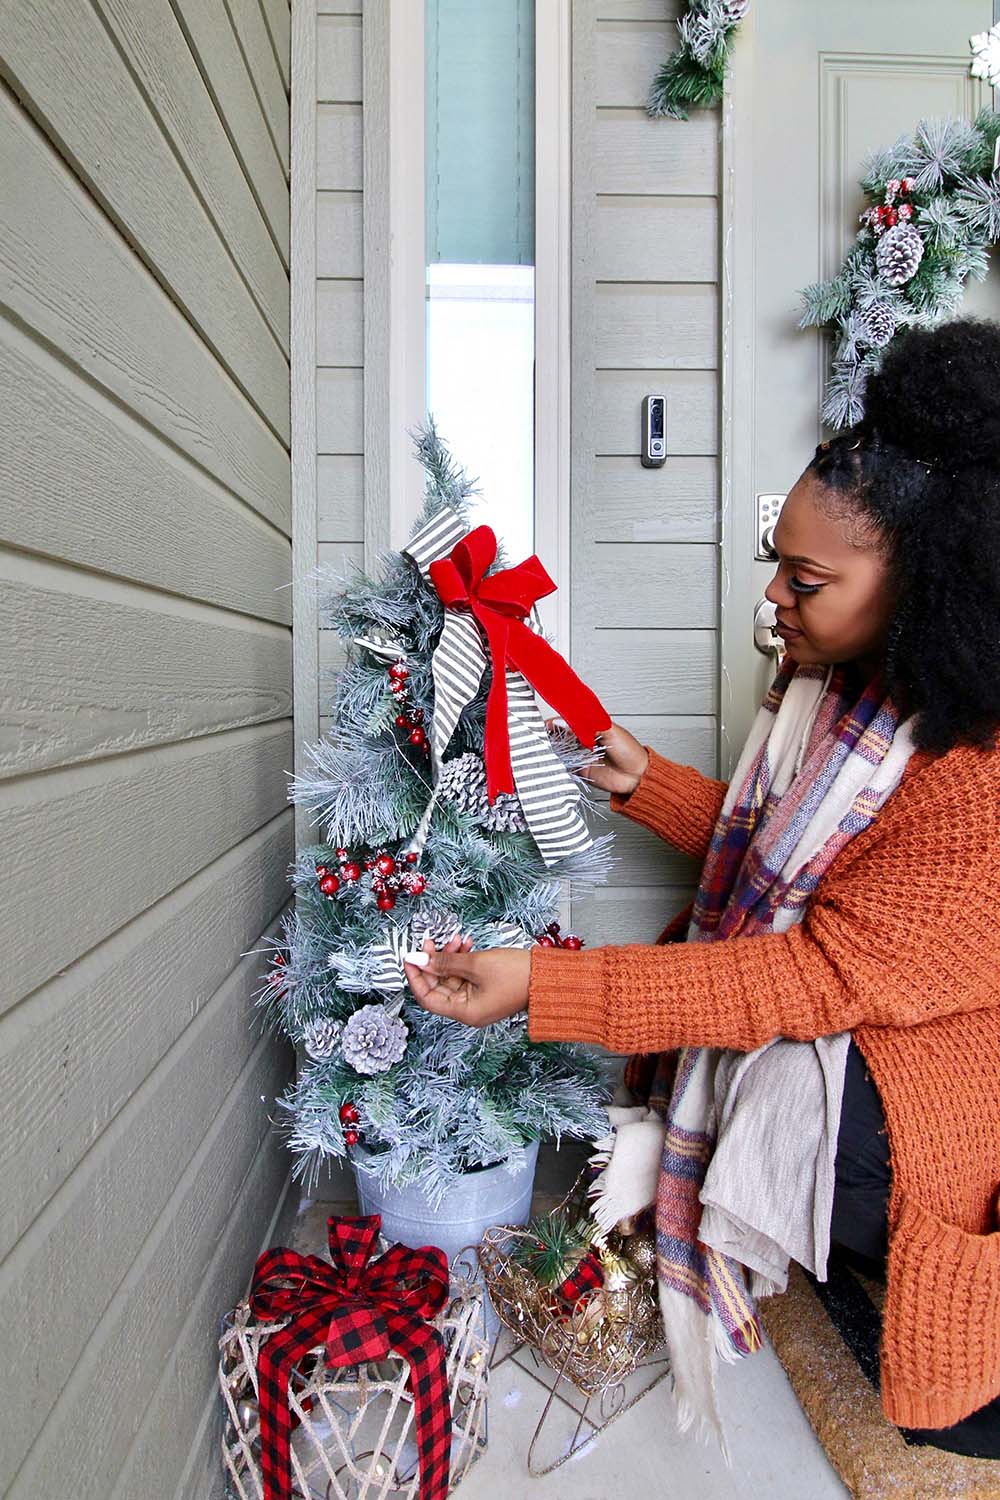 A woman touches a porch Christmas tree decorate with snowy pinecones and berries.